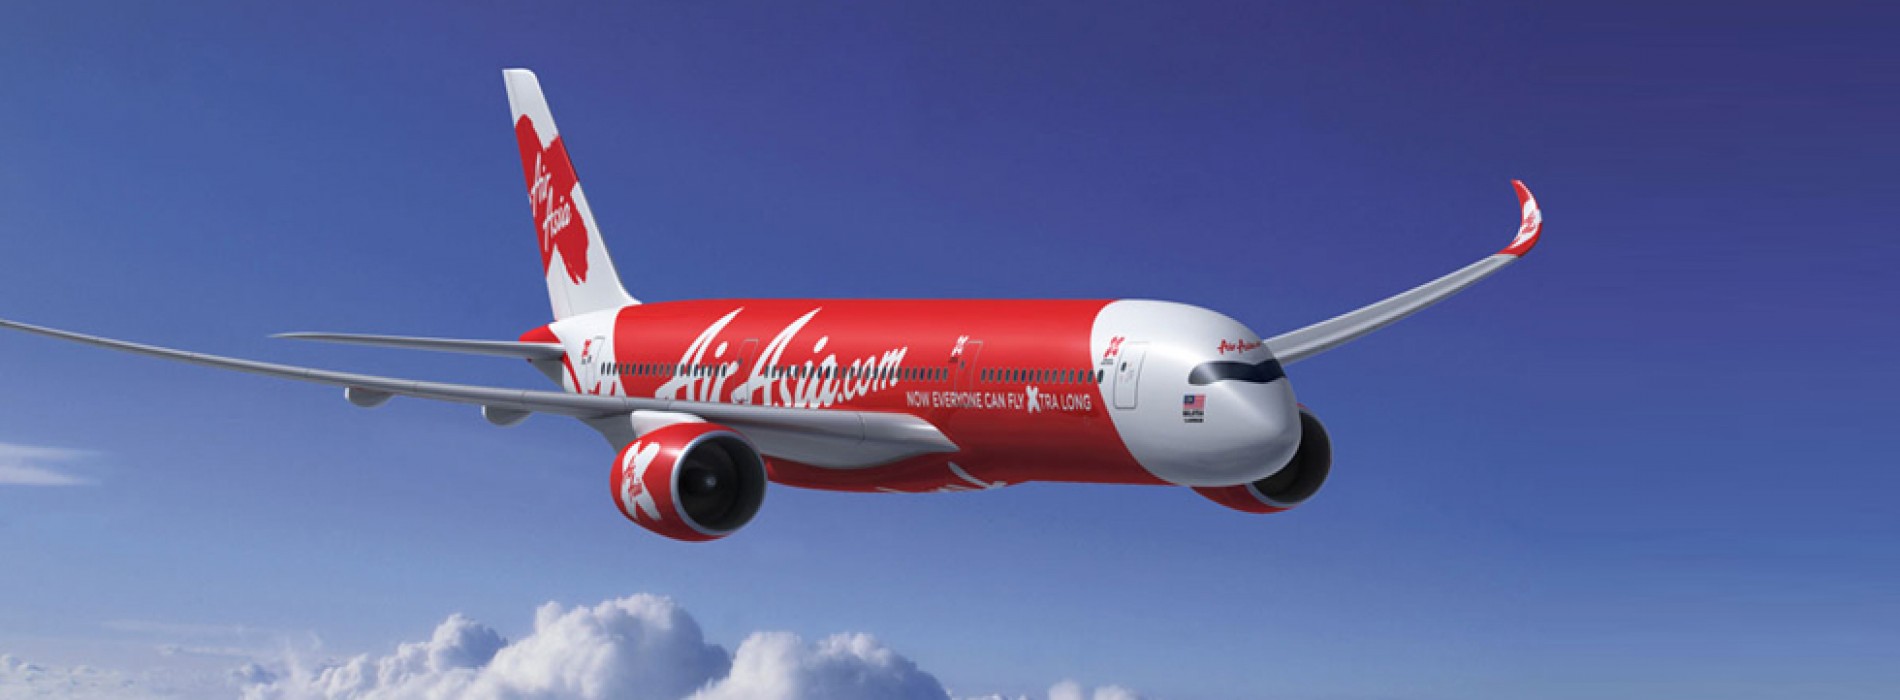 AirAsia India Flight Ticket offers for 2018